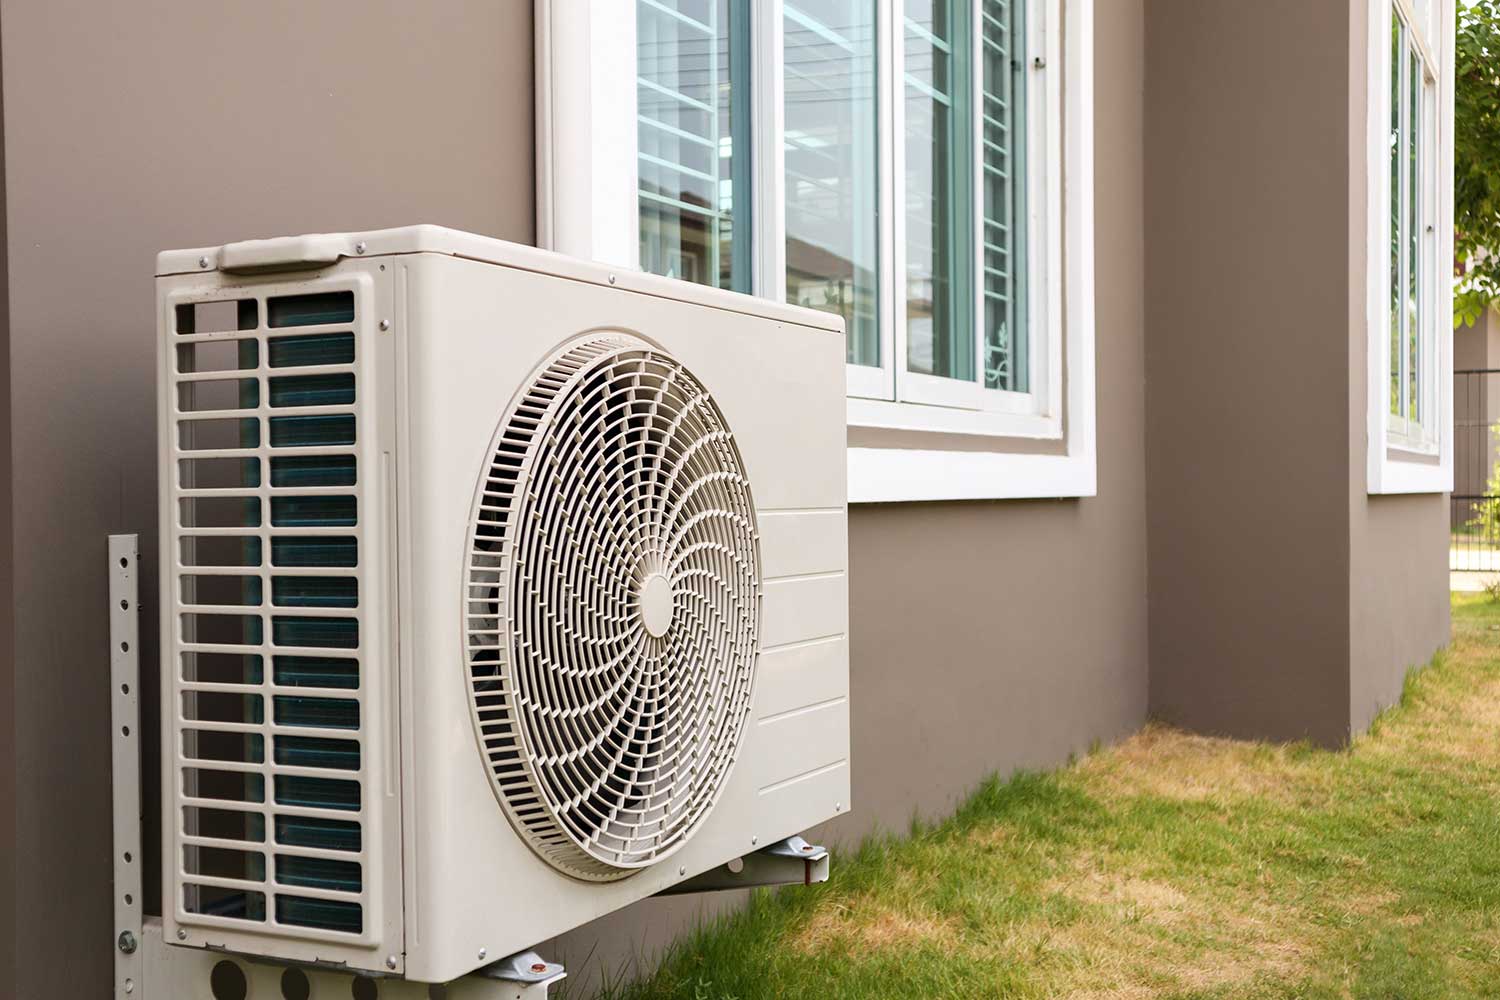 Air conditioning savings is about the kilowatts